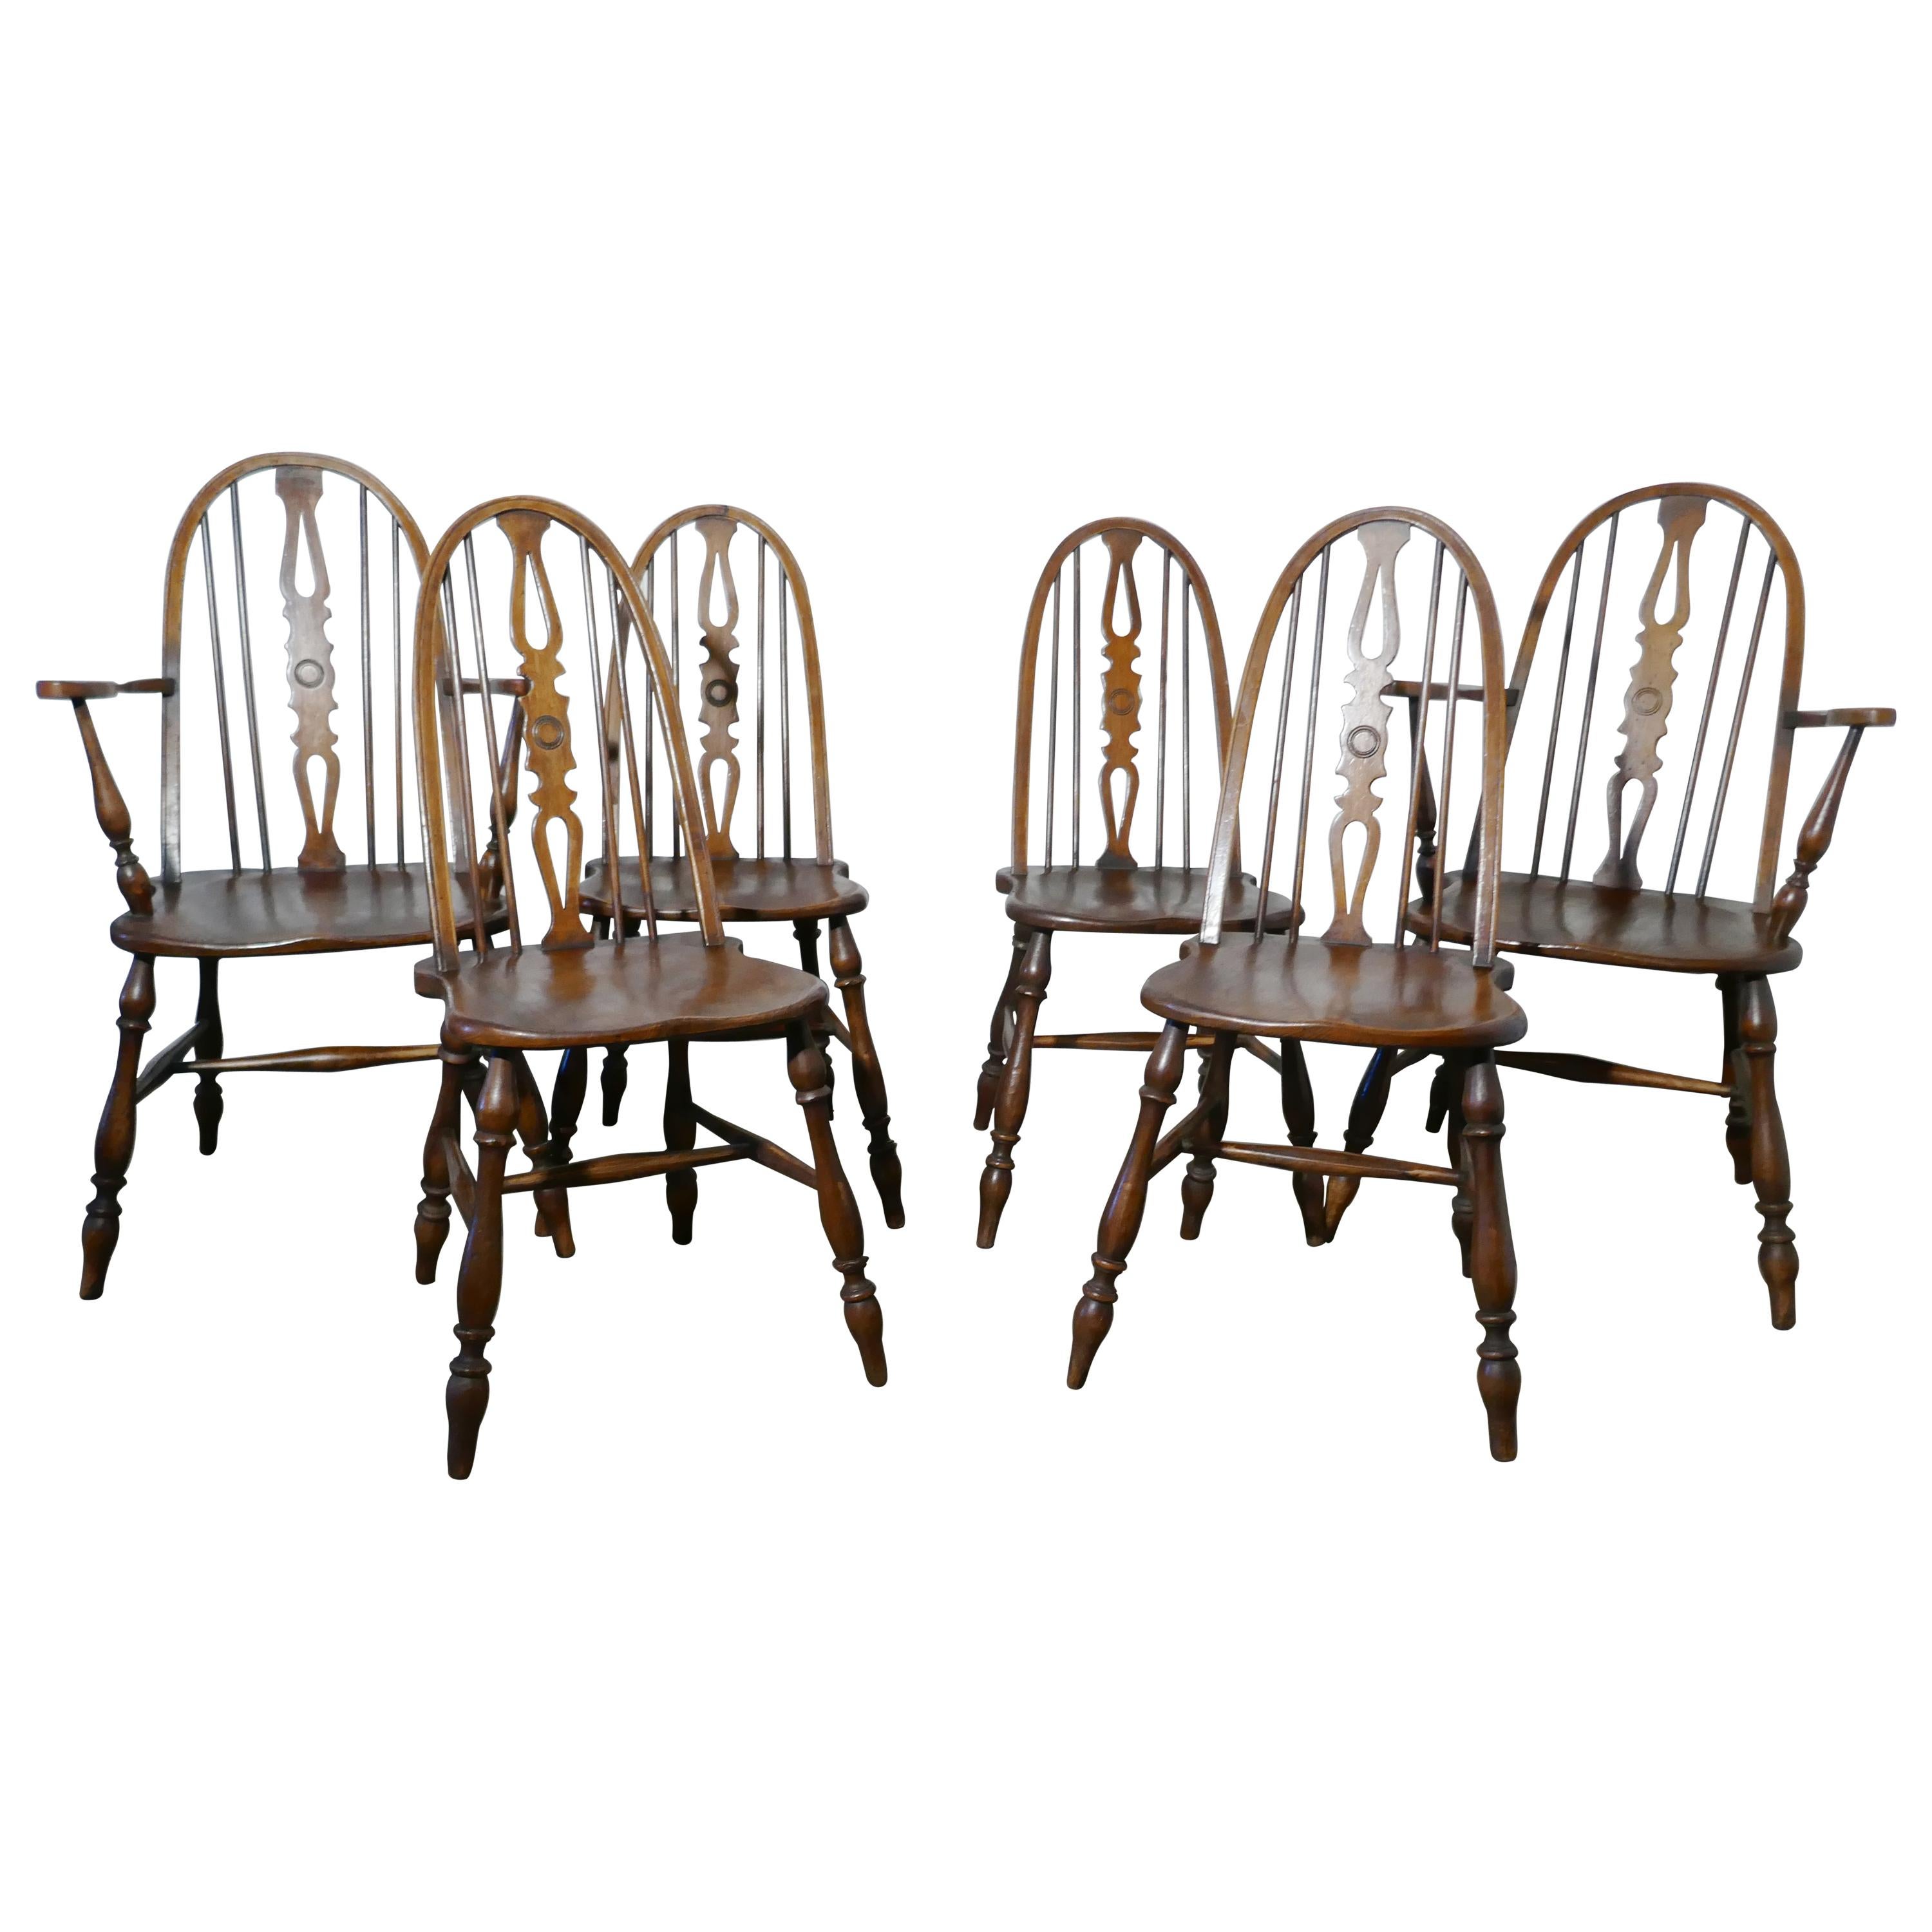 Set of 6 Beech and Elm Arts & Crafts High Back English Windsor Chairs